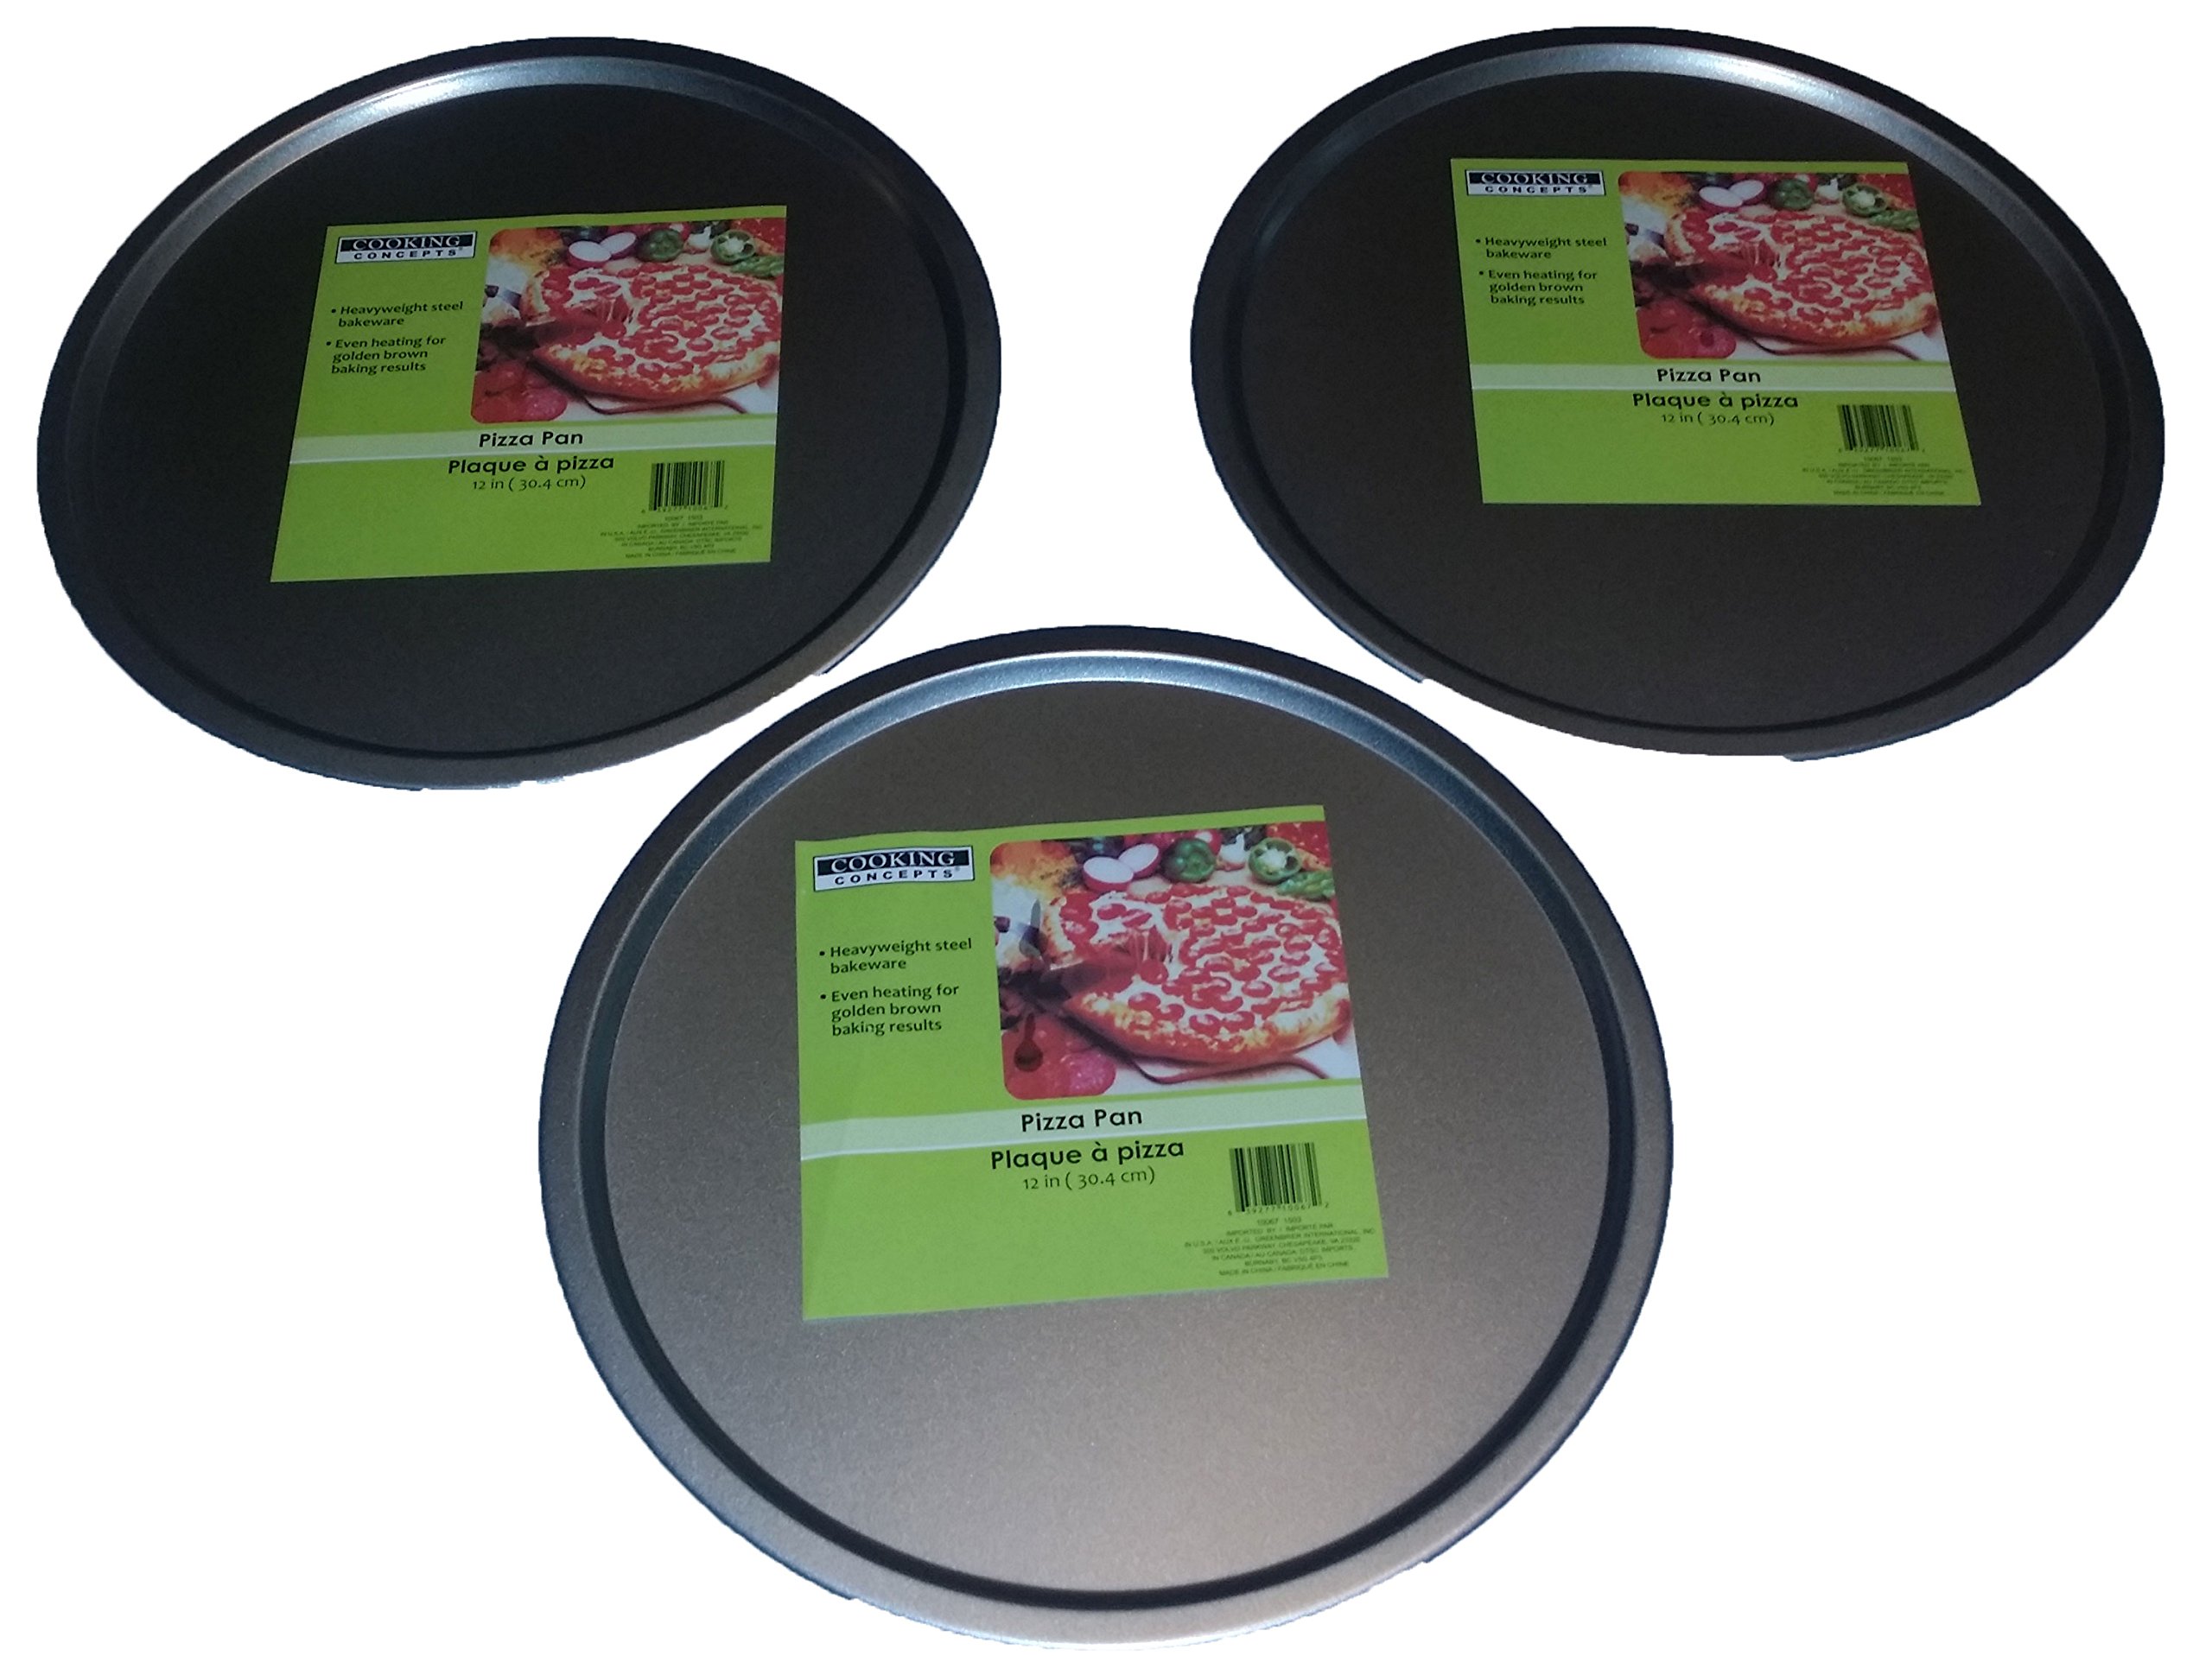 Cooking Concepts Italian THREE 12 inch Pizza Pans for baking Pizzas, cookies or Biscuits